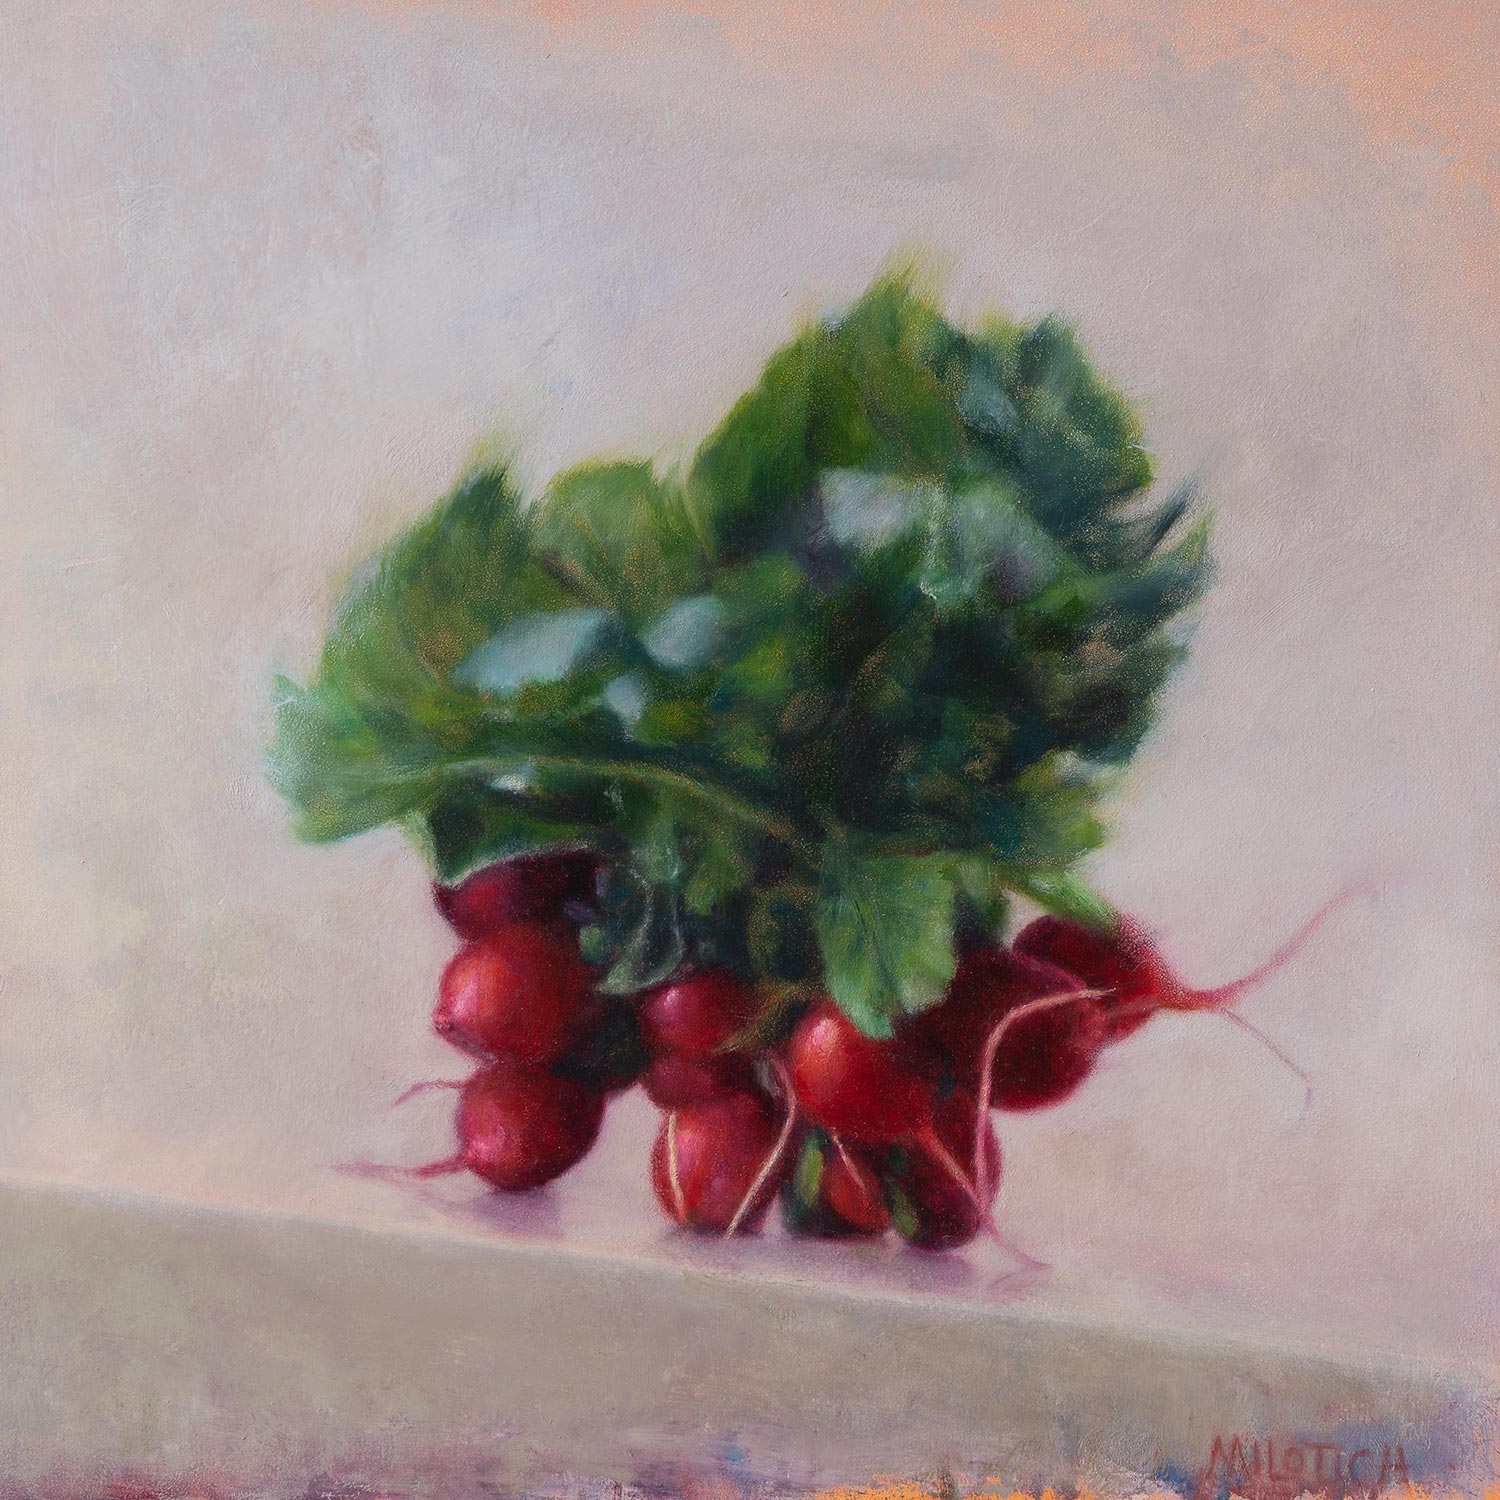 Radishes, an original oil painting by Ute Milotich